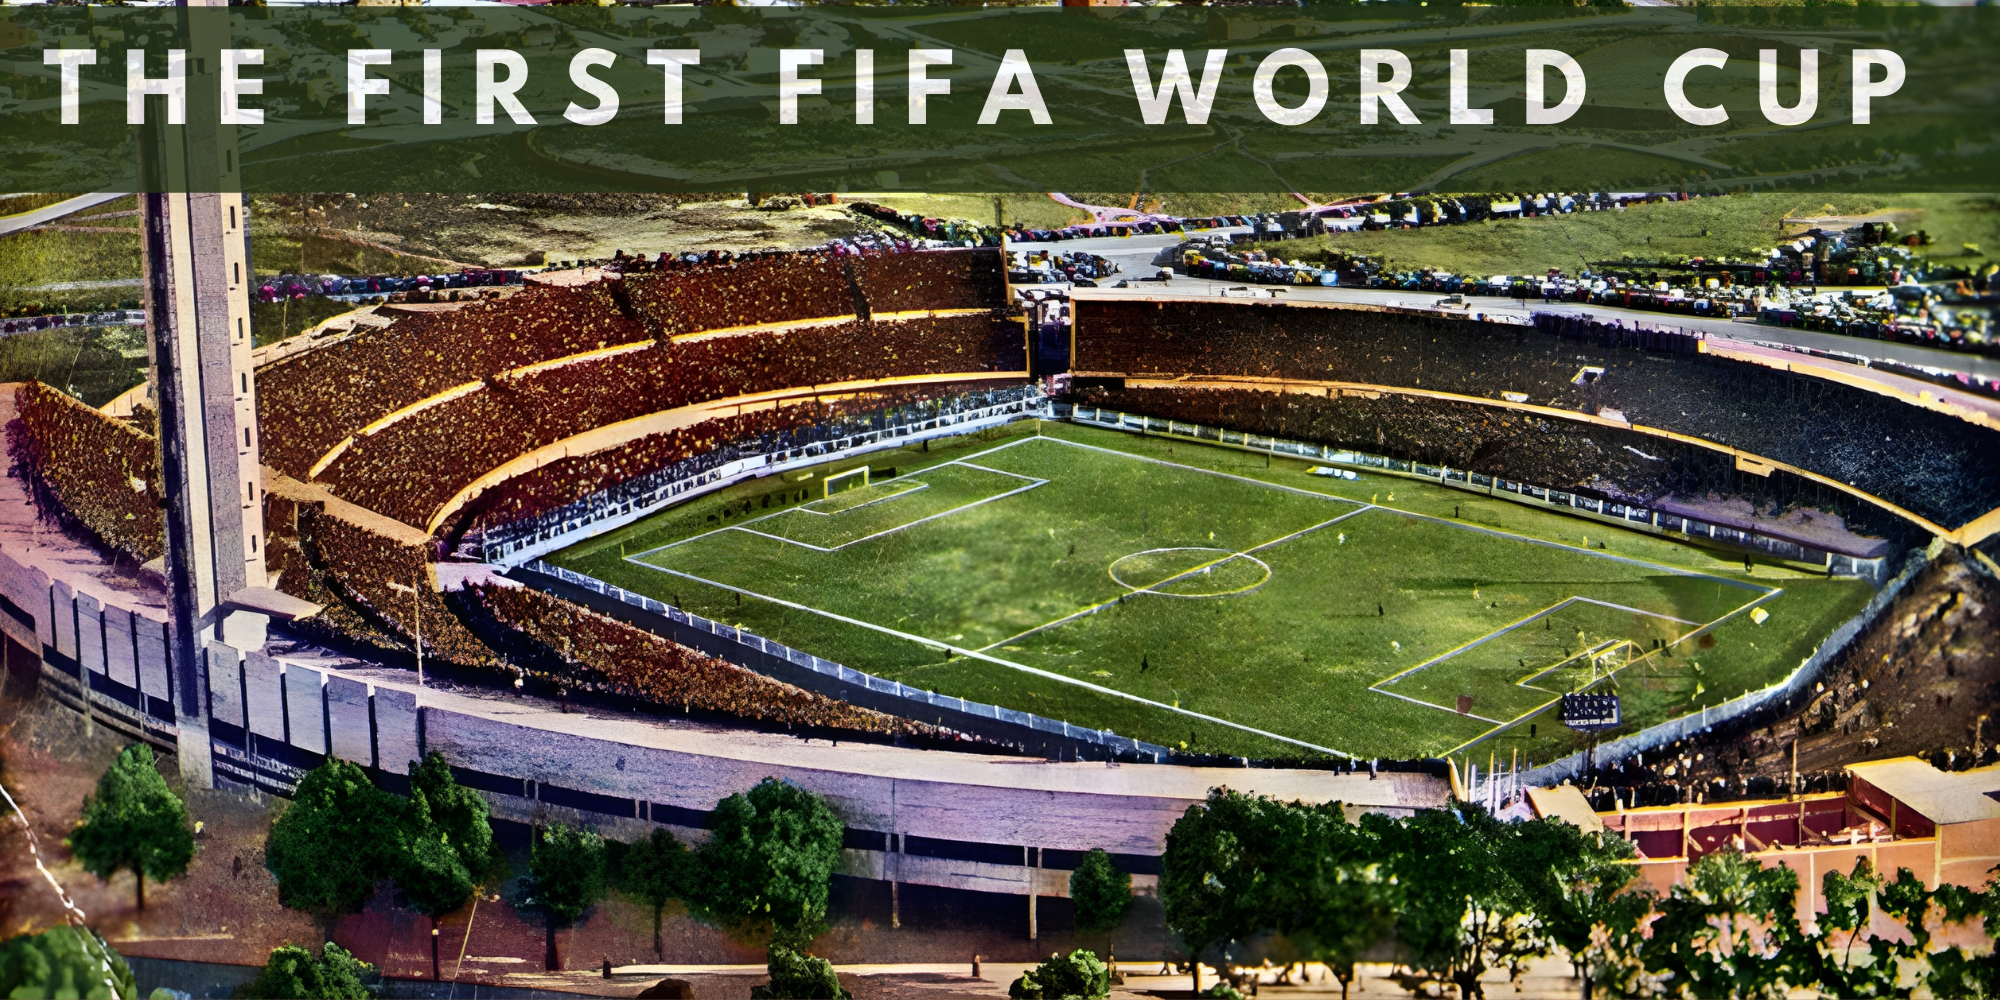 Kick-off to Glory Recounting the First-Ever FIFA World Cup